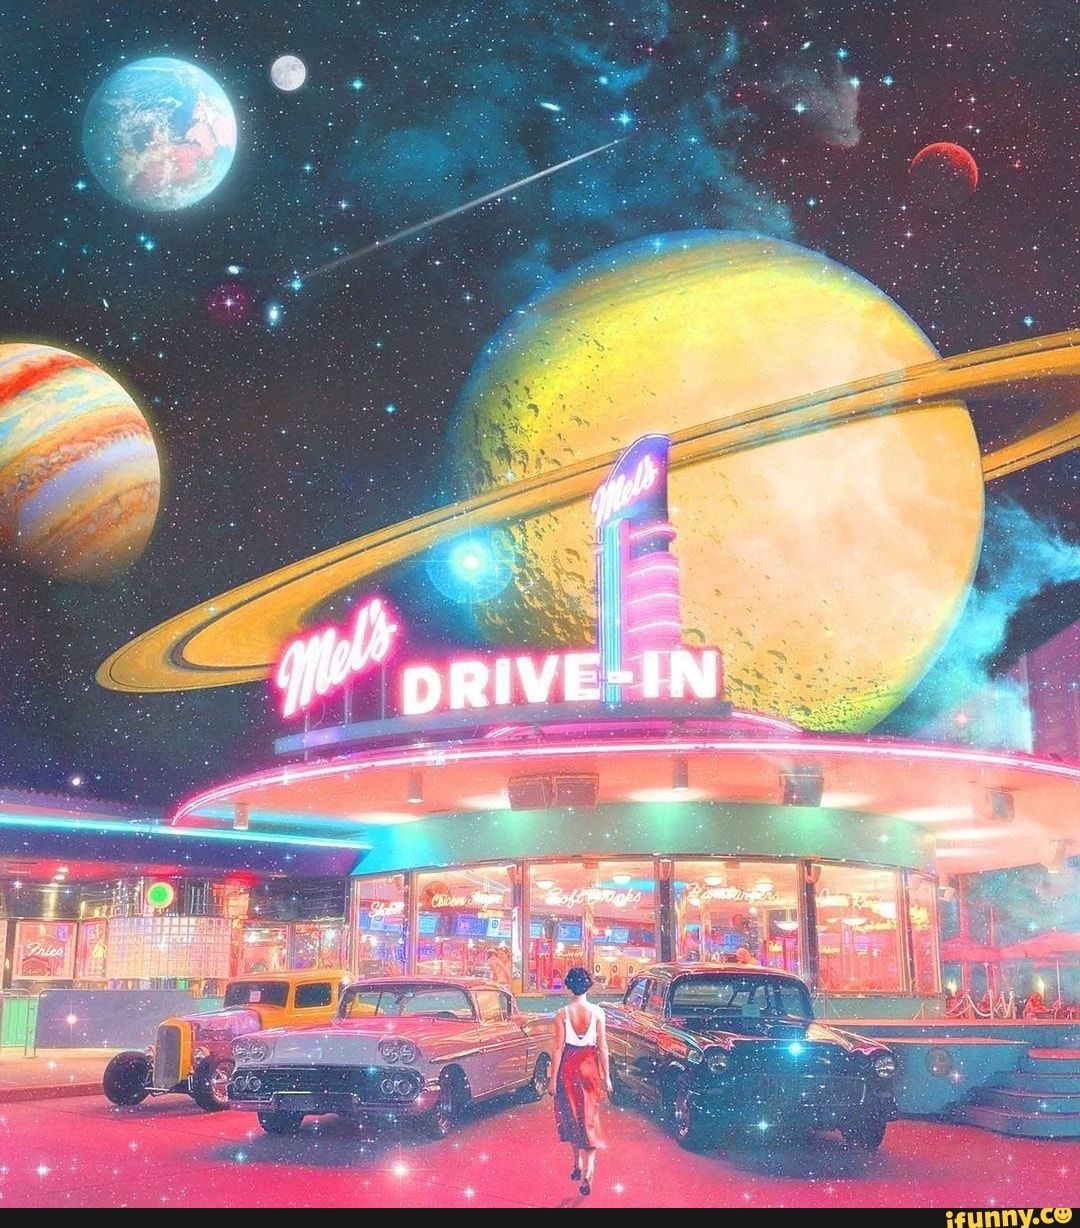 A painting of an alien planet with cars and people - 50s